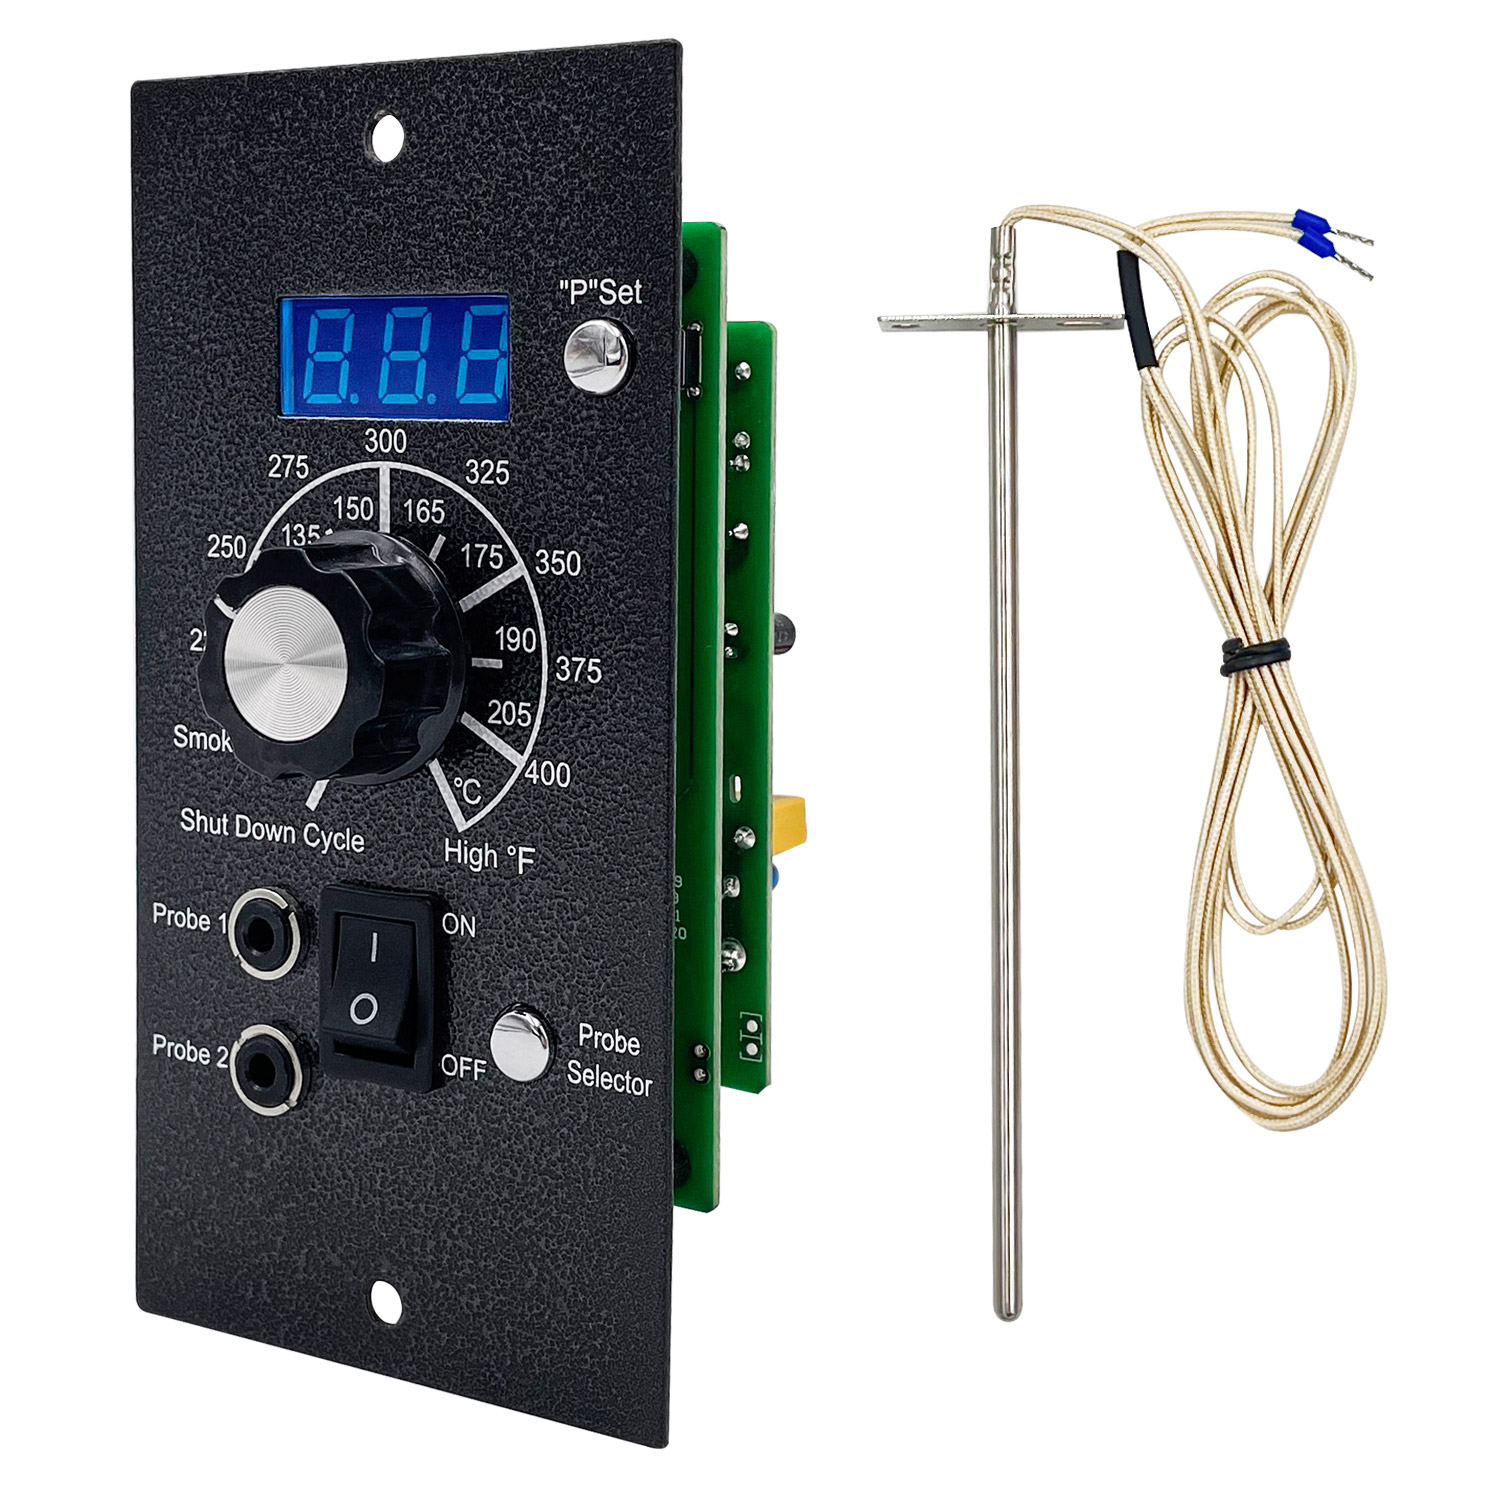 BAC365-Upgraded Digital Control Board for Traeger Grill with RTD Tempe Probe-YAOAWE